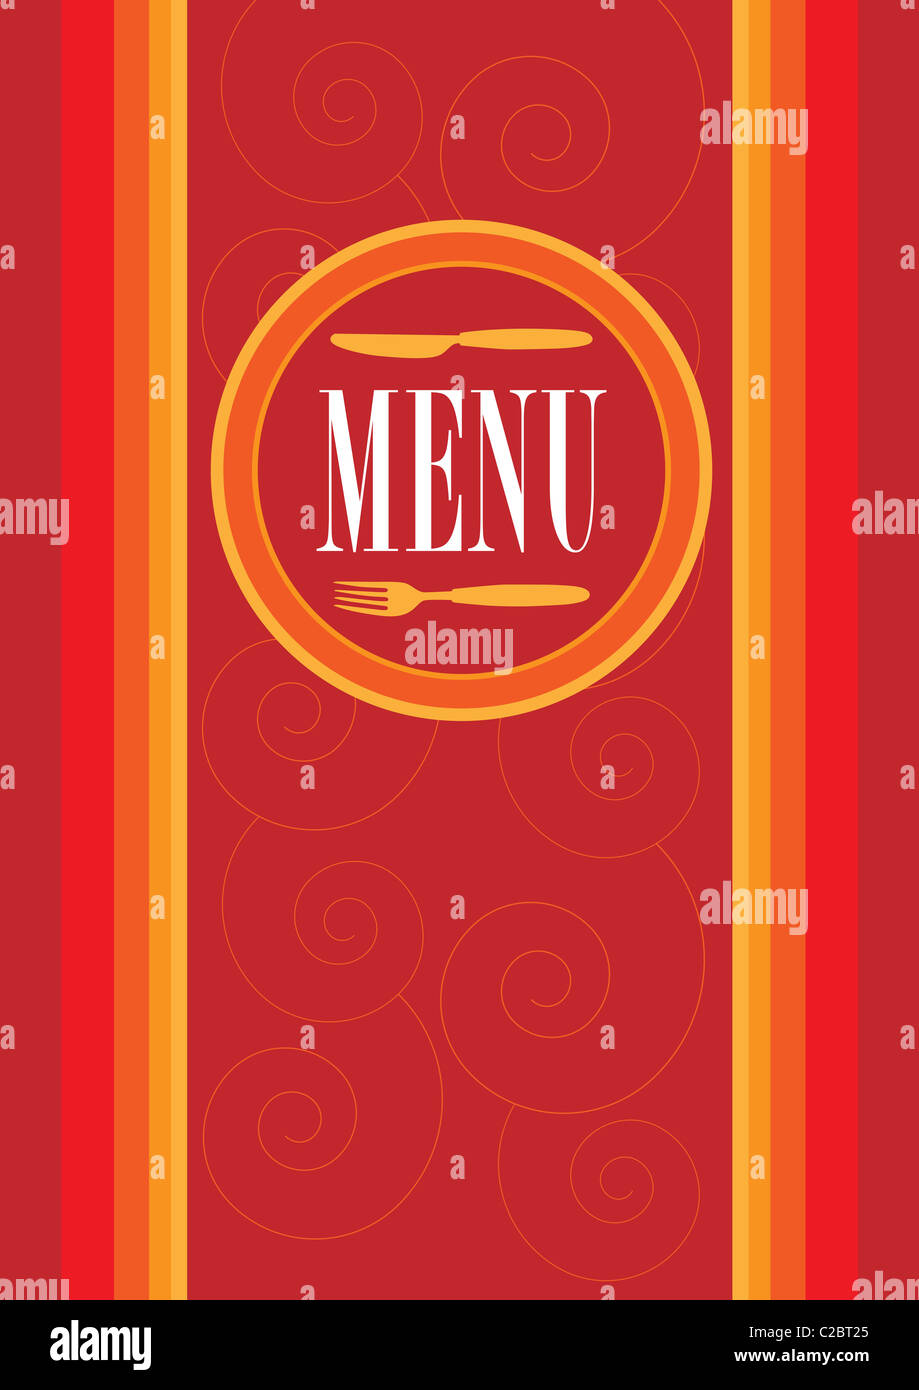 Menu Card Design - Menu Sign and Cutlery Icon on Retro Background Stock  Photo - Alamy